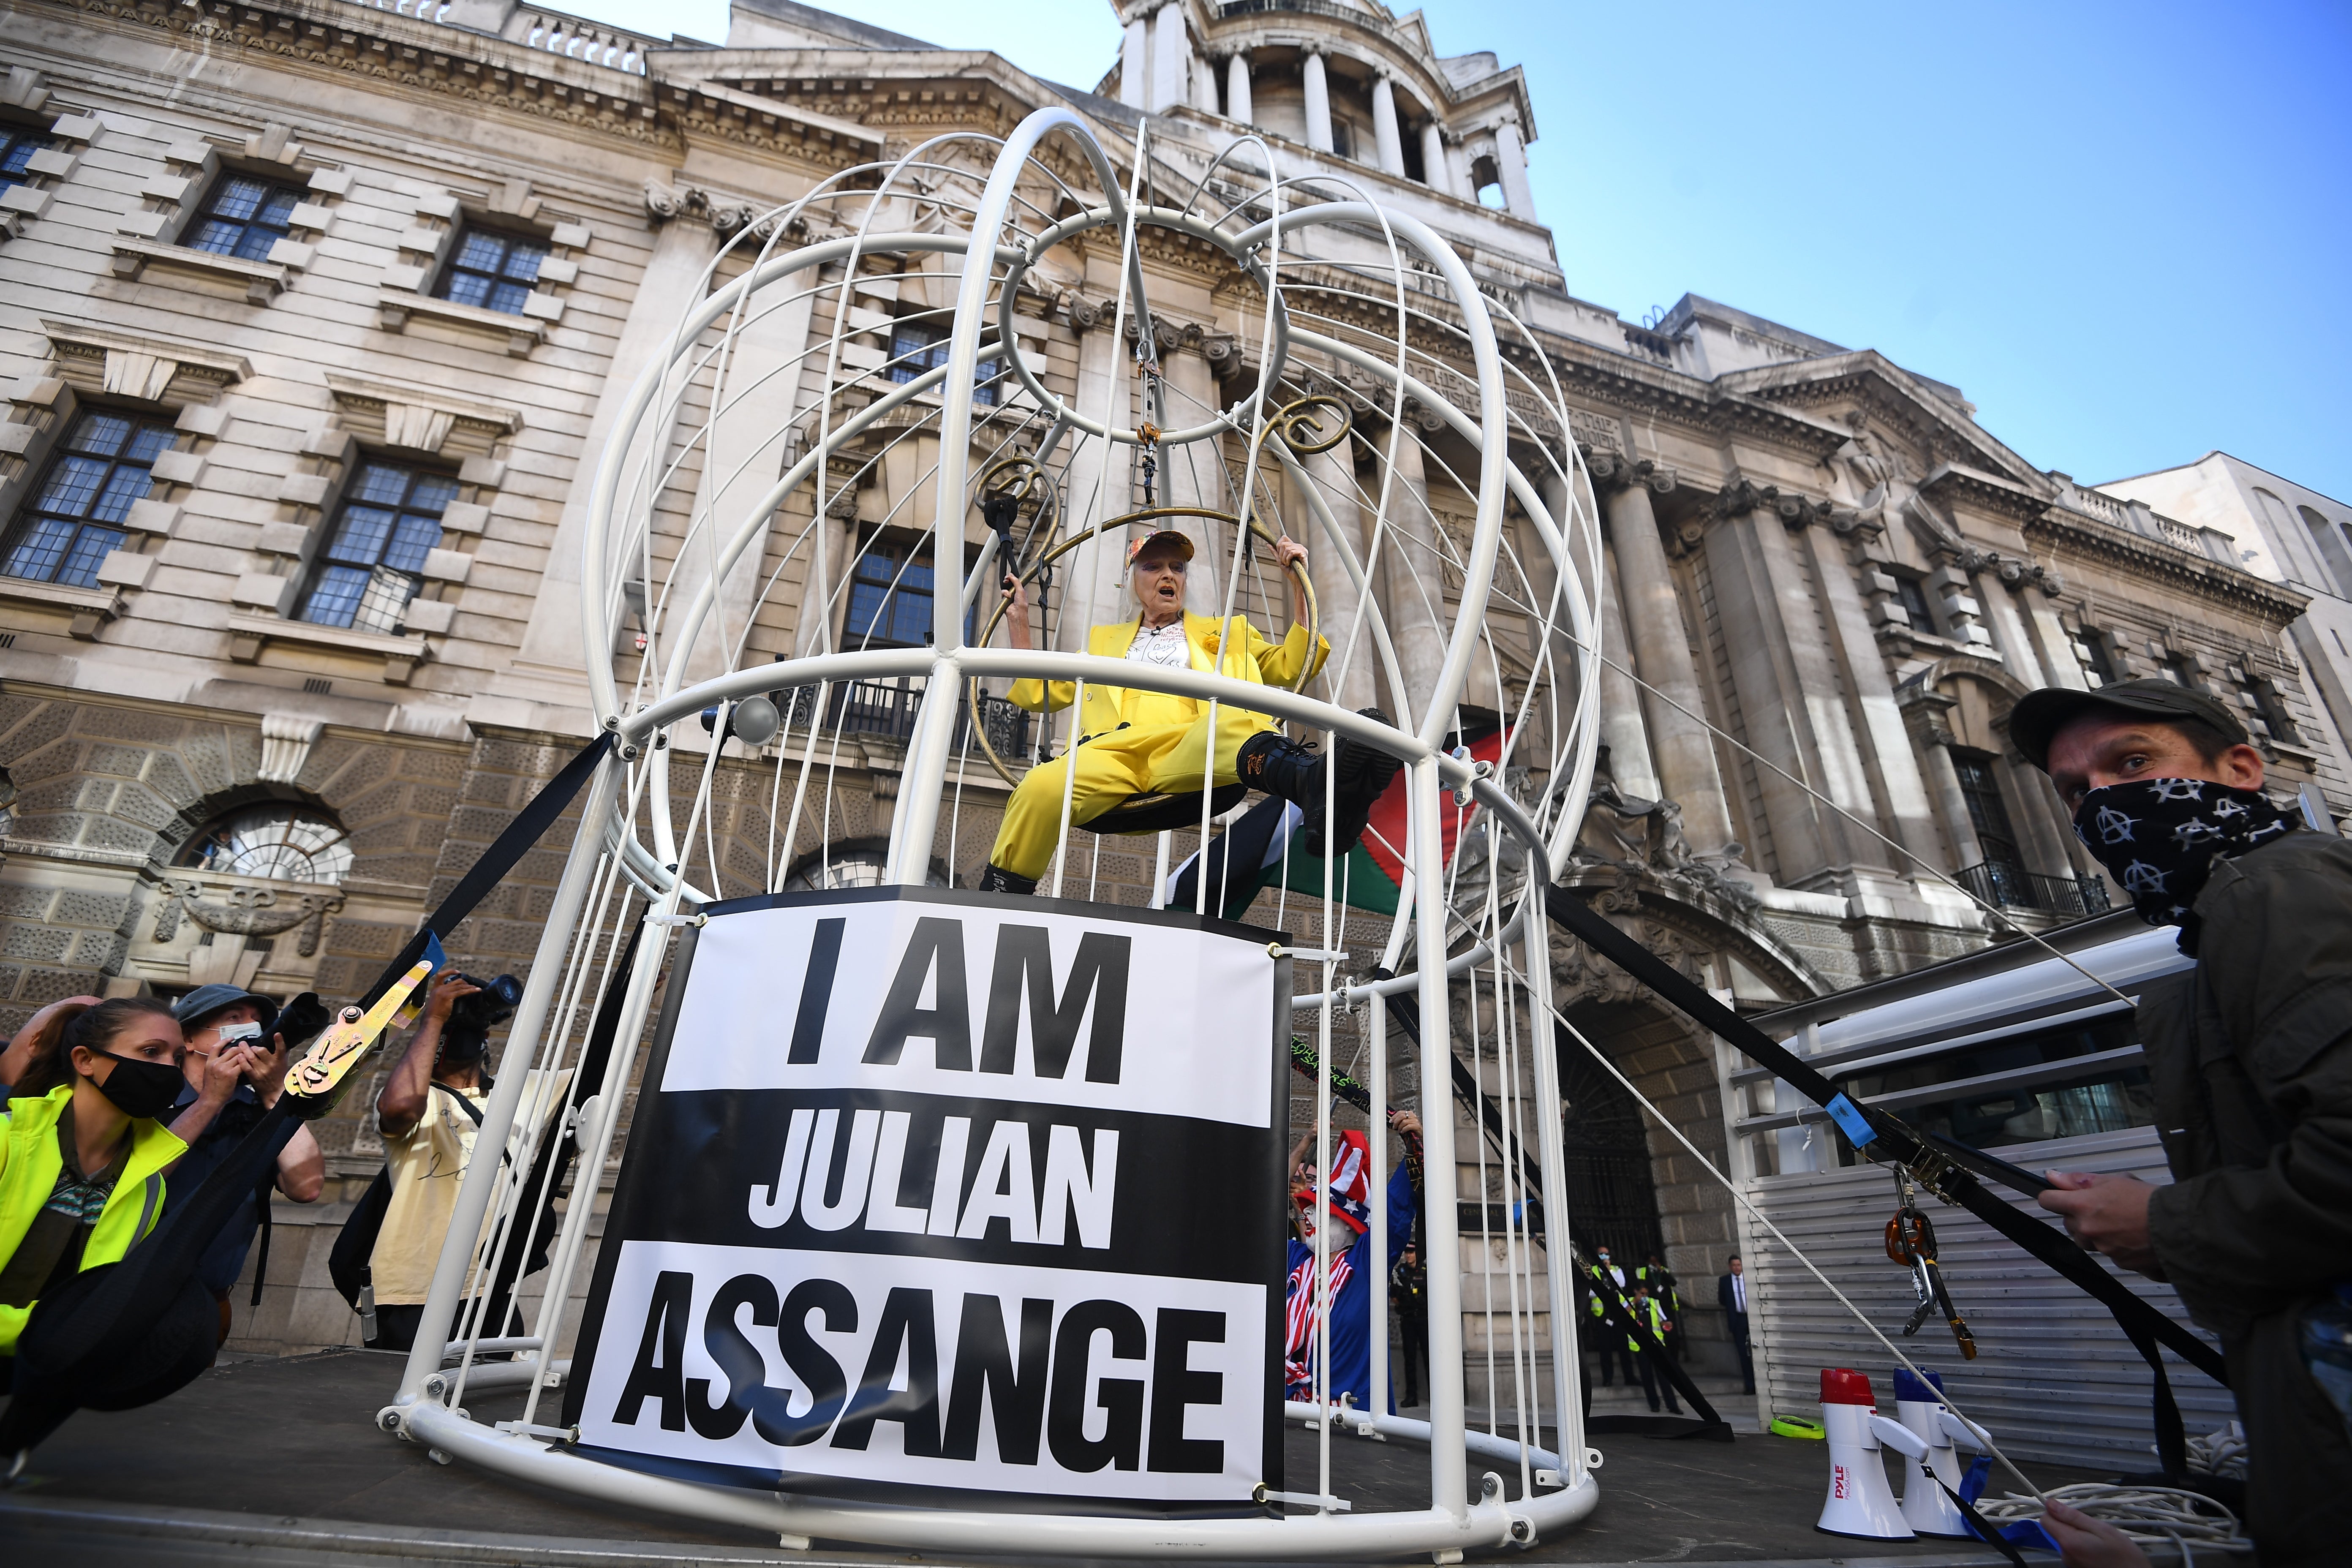 Julian Assange’s high-profile supporters included the late fashion designer Dame Vivienne Westwood, who was suspended in a 10ft high bird cage outside the Old Bailey in London to protest against his extradition (PA)